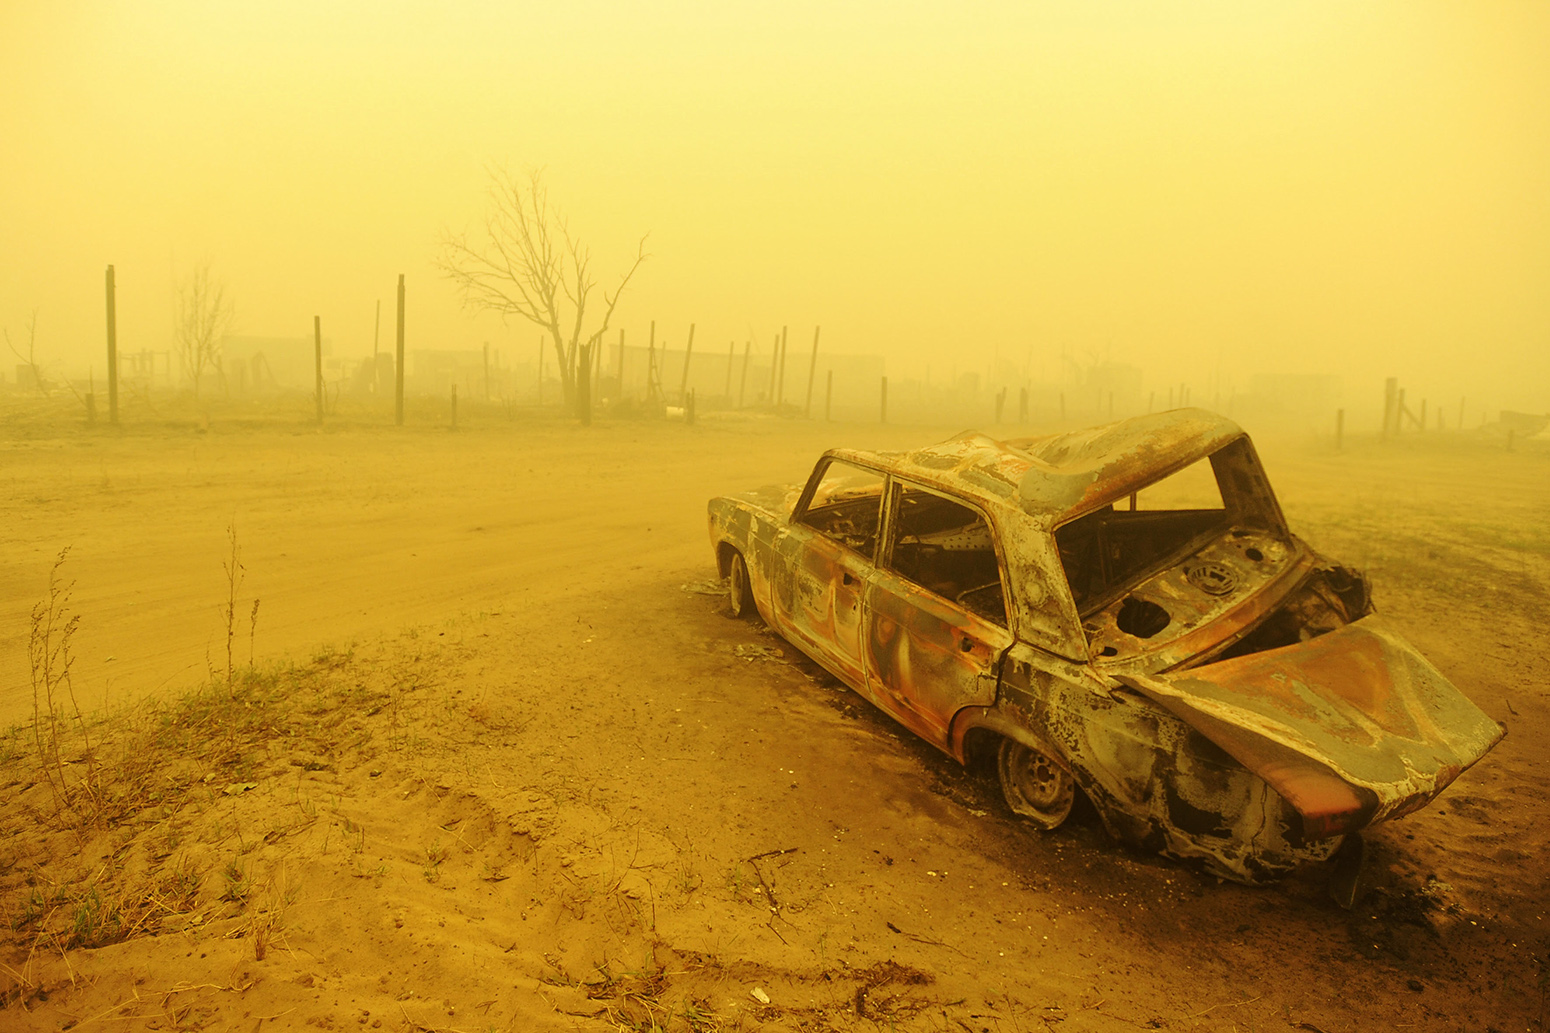 Aftermath of wildfires, 4 August 2010. Credit: ITAR-TASS News Agency / Alamy Stock Photo.